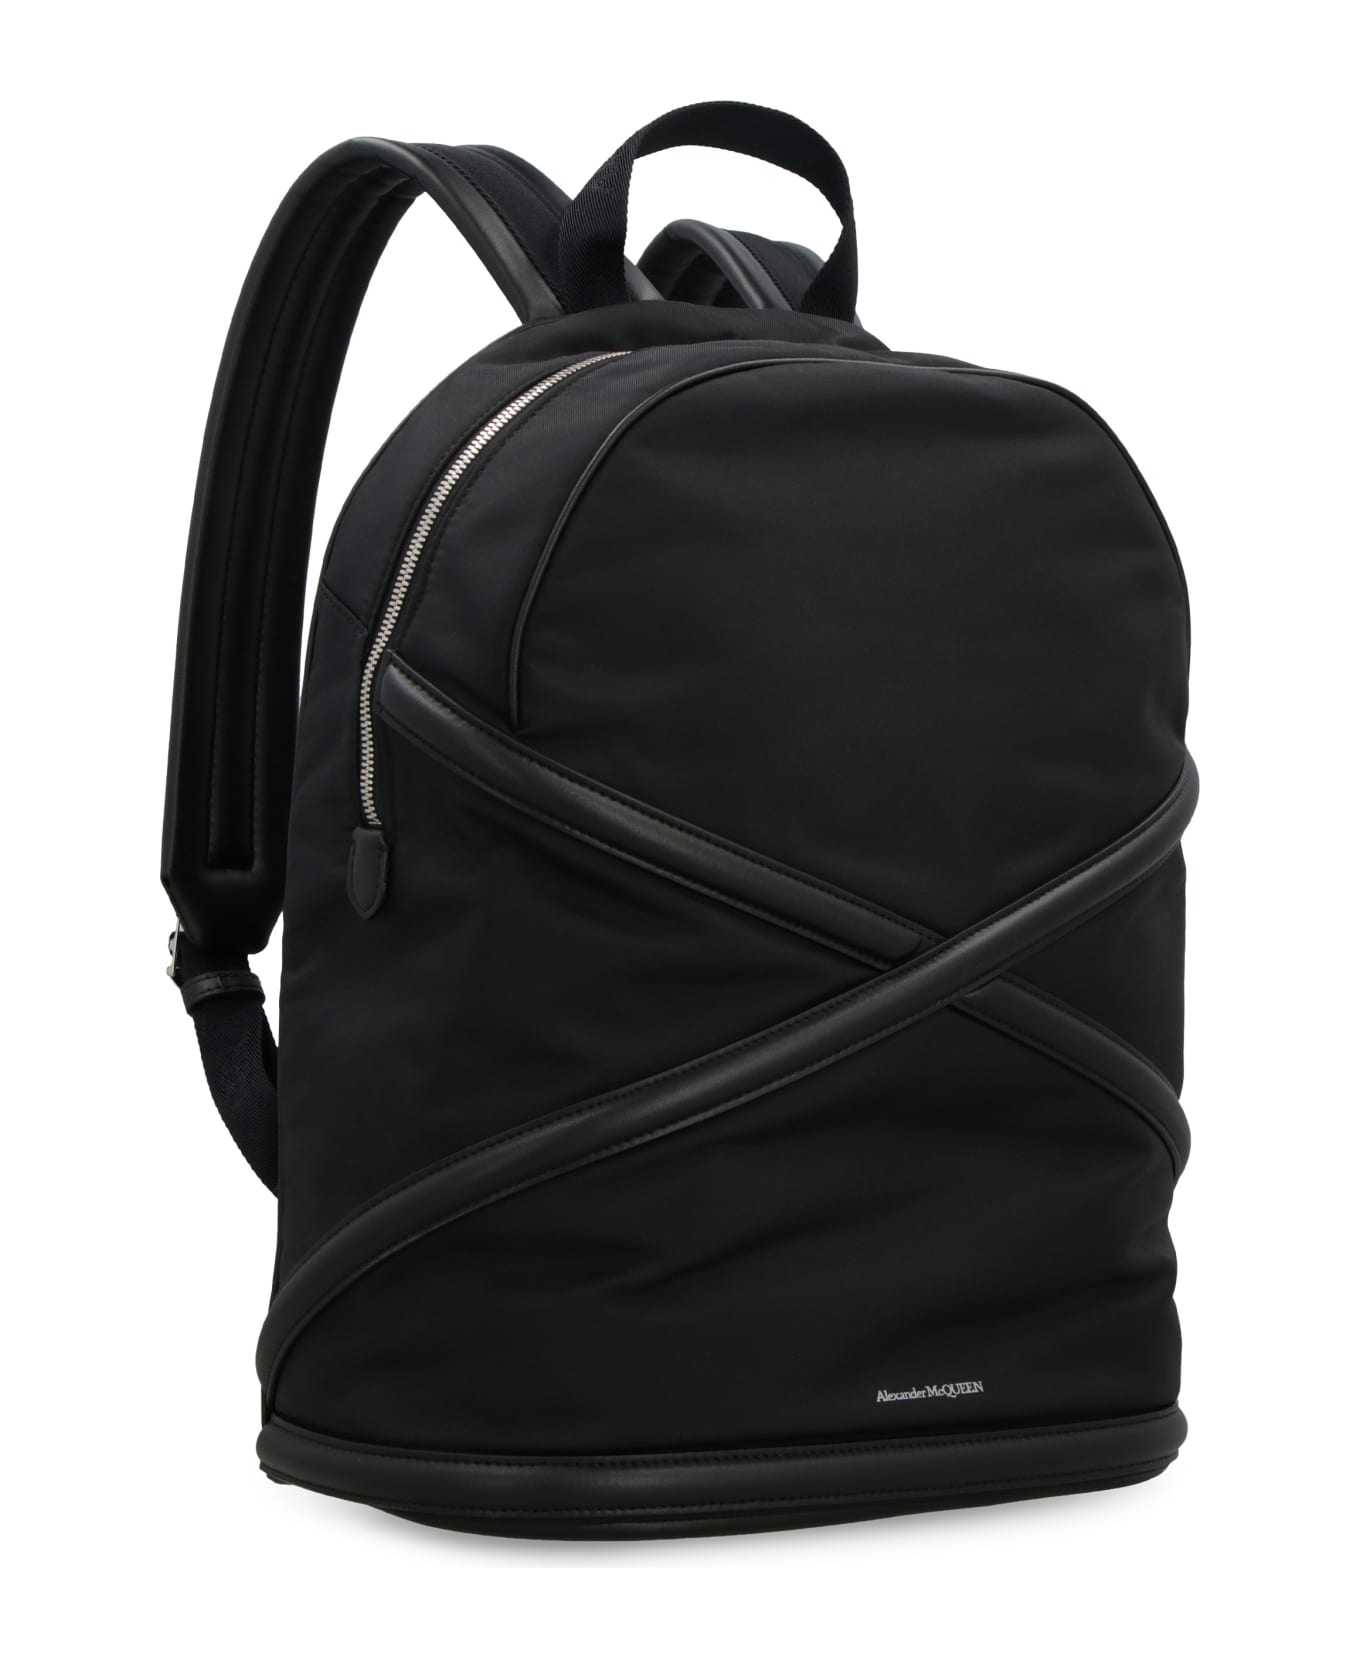 Alexander McQueen Harness Leather Details Nylon Backpack